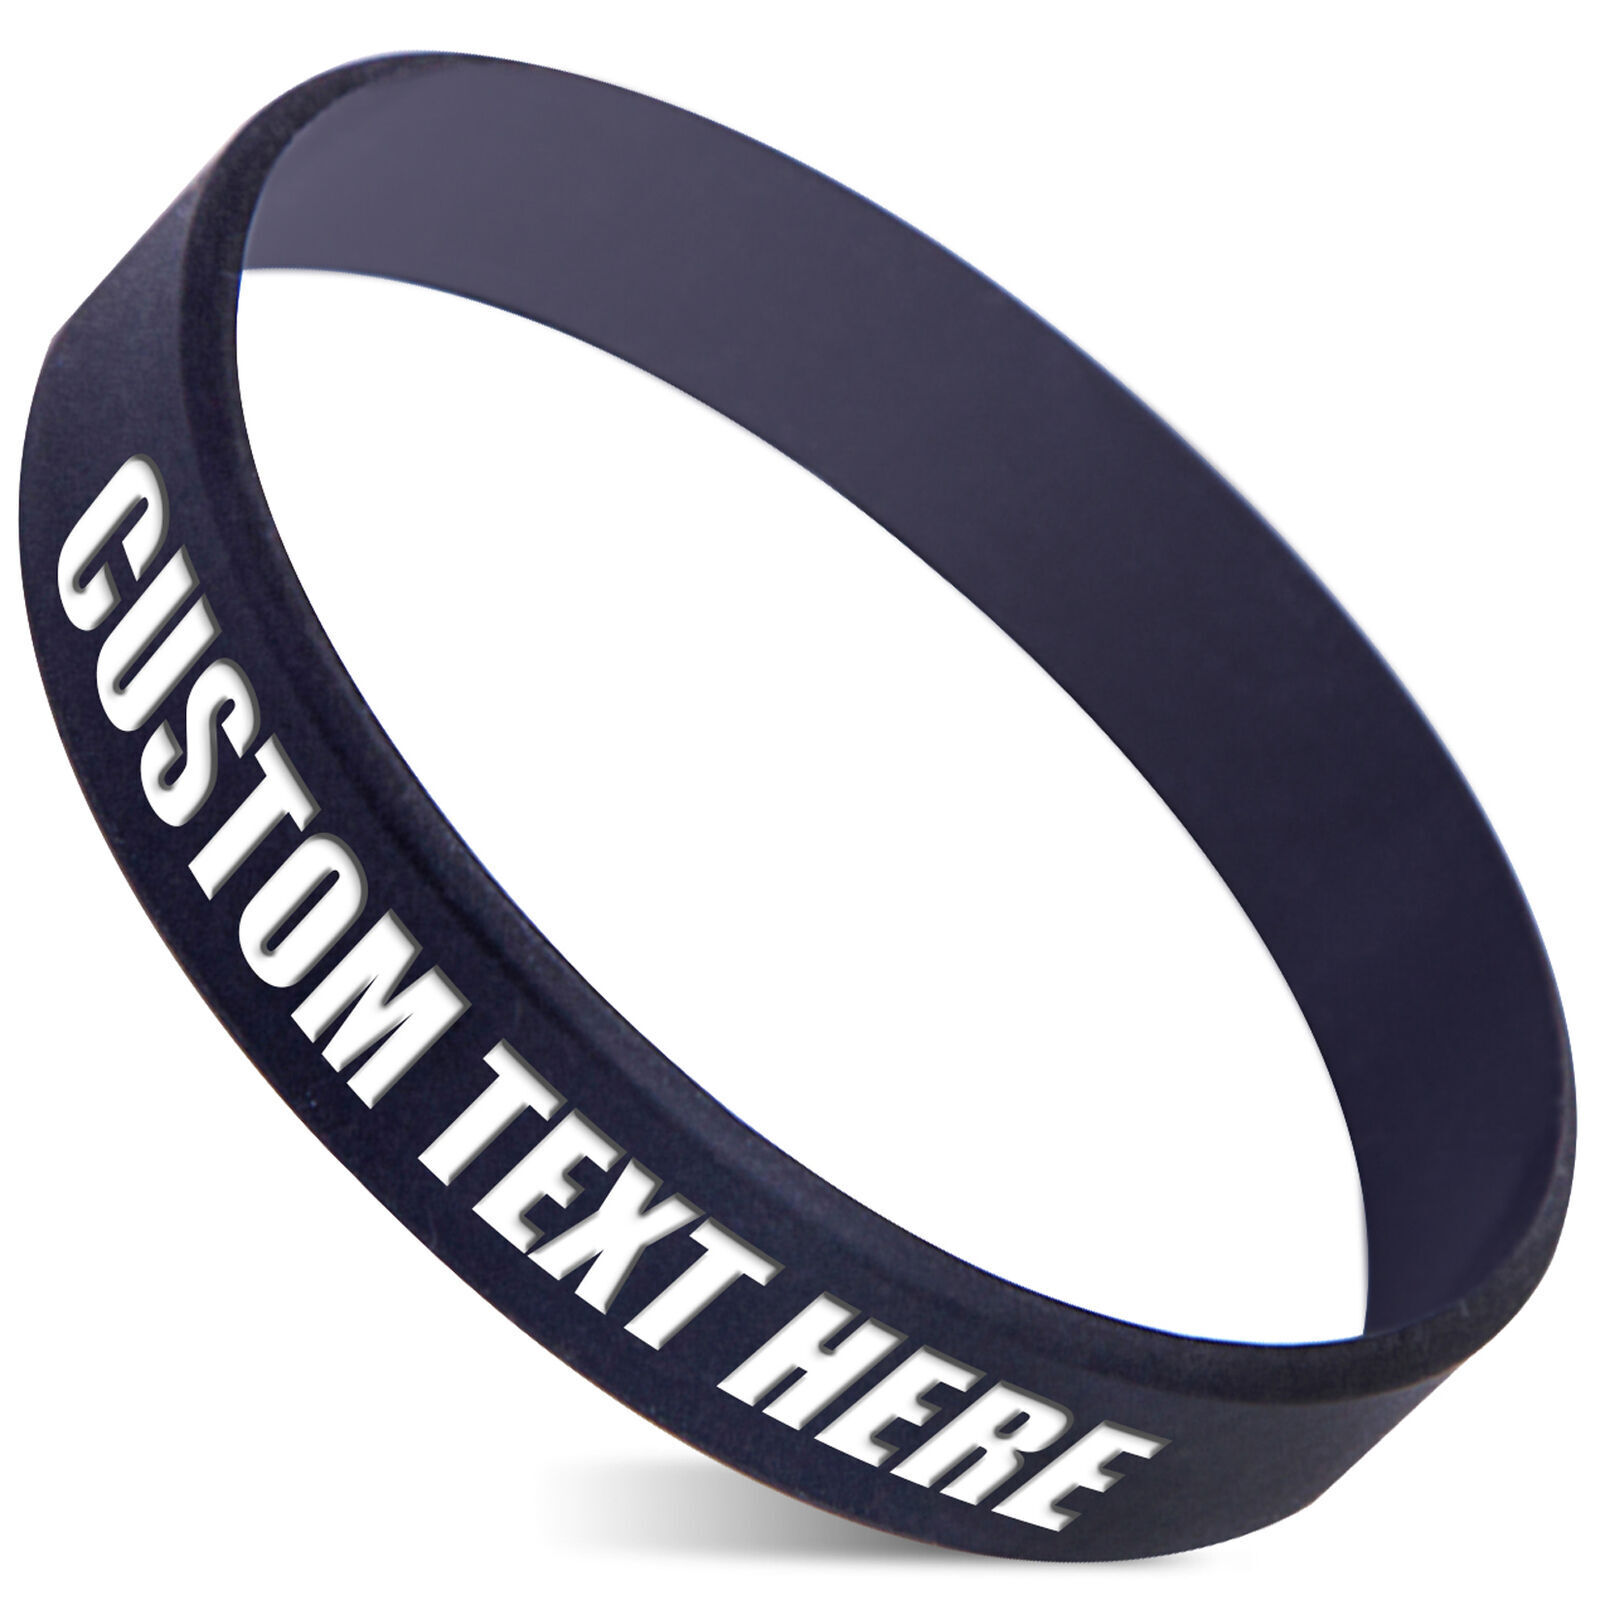 Custom Silicone Wristbands Personalize Engraved Rubber Bracelets Gifts Events